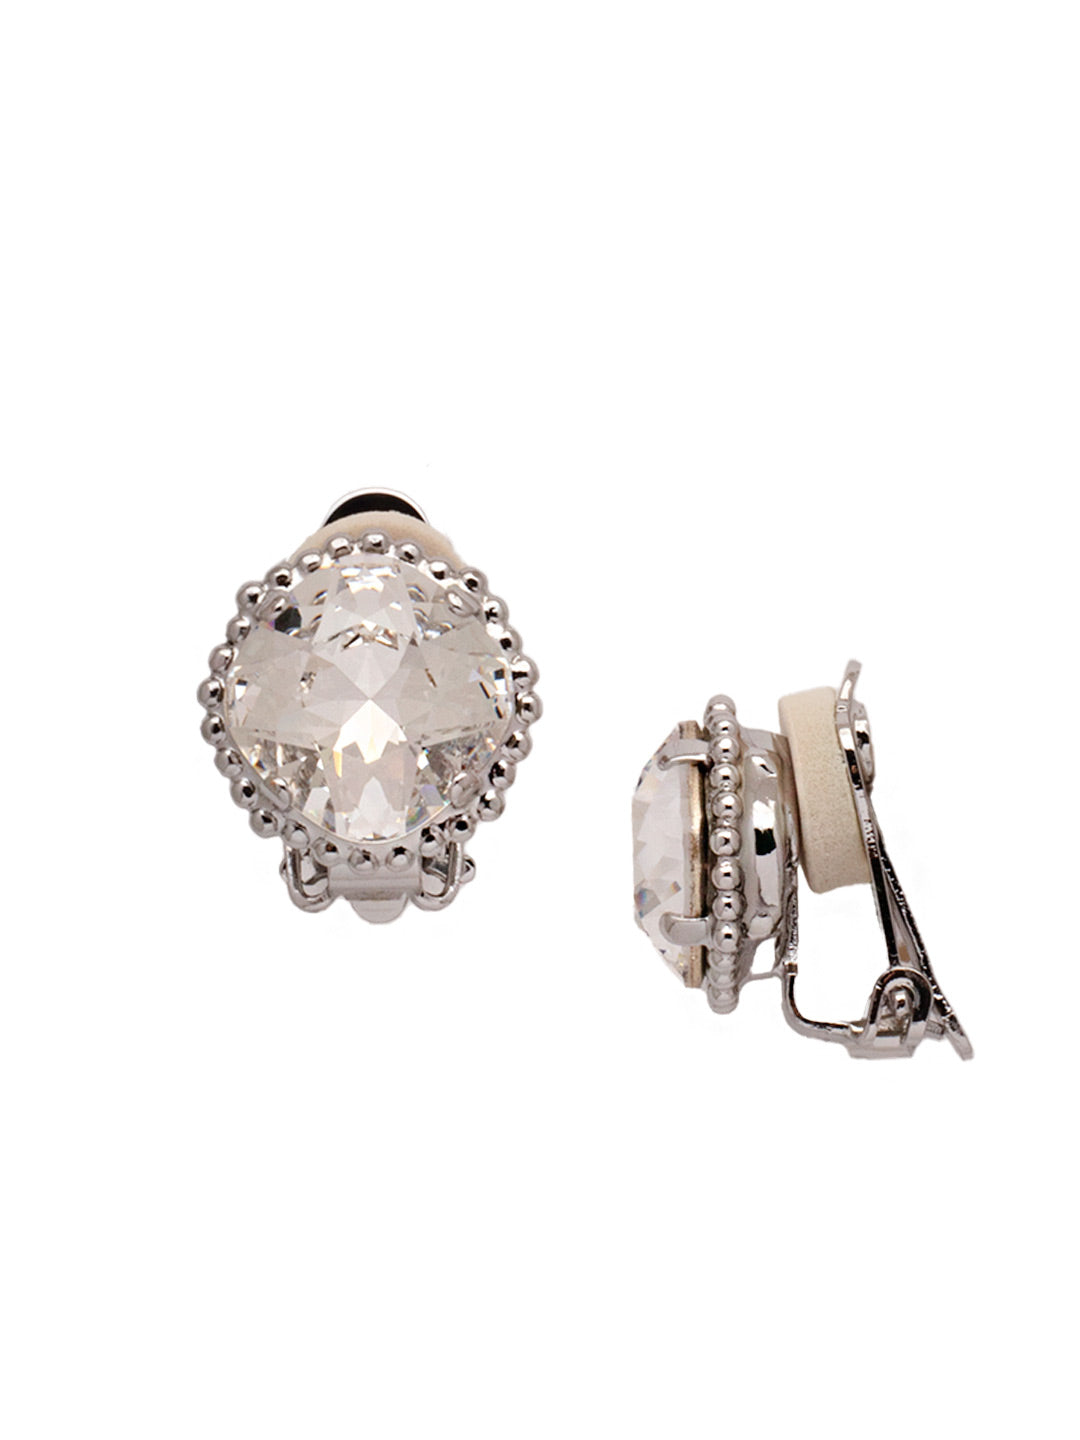 Cushion Cut Solitaire Clip On Earring - EBX10CRHCRY - <p>All around allure. These earrings feature a rounded-edge, cushion cut stone that is encircled by a vintage inspired decorative edged border. Post backing ensures accessible, everyday wear. From Sorrelli's Crystal collection in our Palladium Silver-tone finish.</p>